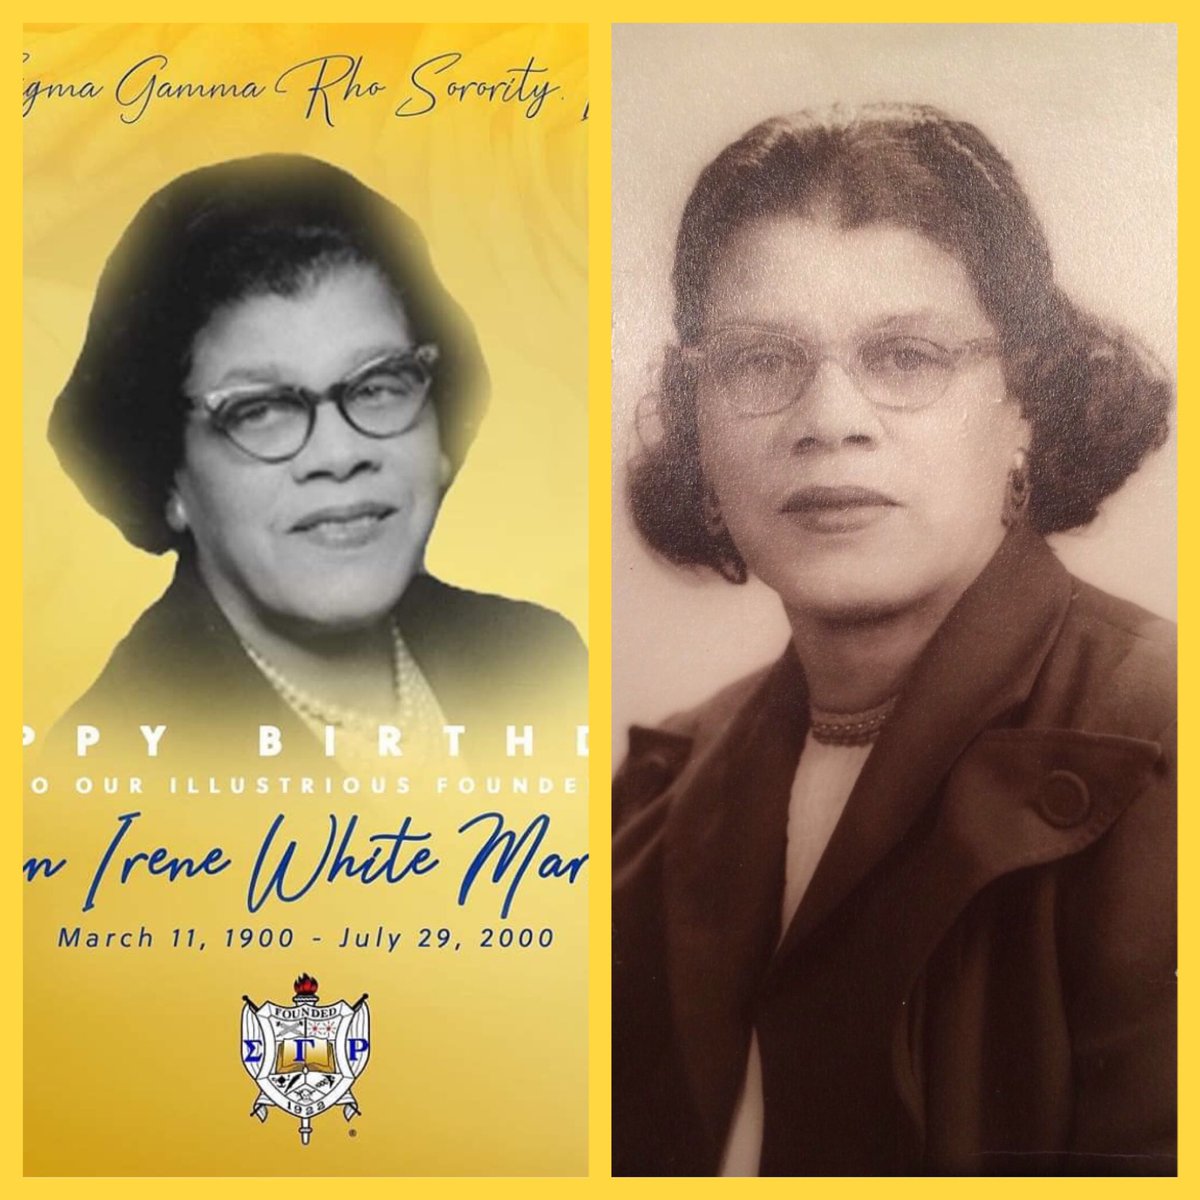 Longtime educator Vivian Irene White-Marbury was one of the first African American women principals in Indianapolis. She was one of the oldest living members of any NPHC sorority— she lived to be 100. White-Marbury is a founding member of ΣΓΡ. #BlackHistoryMonth    #BlackHerstory